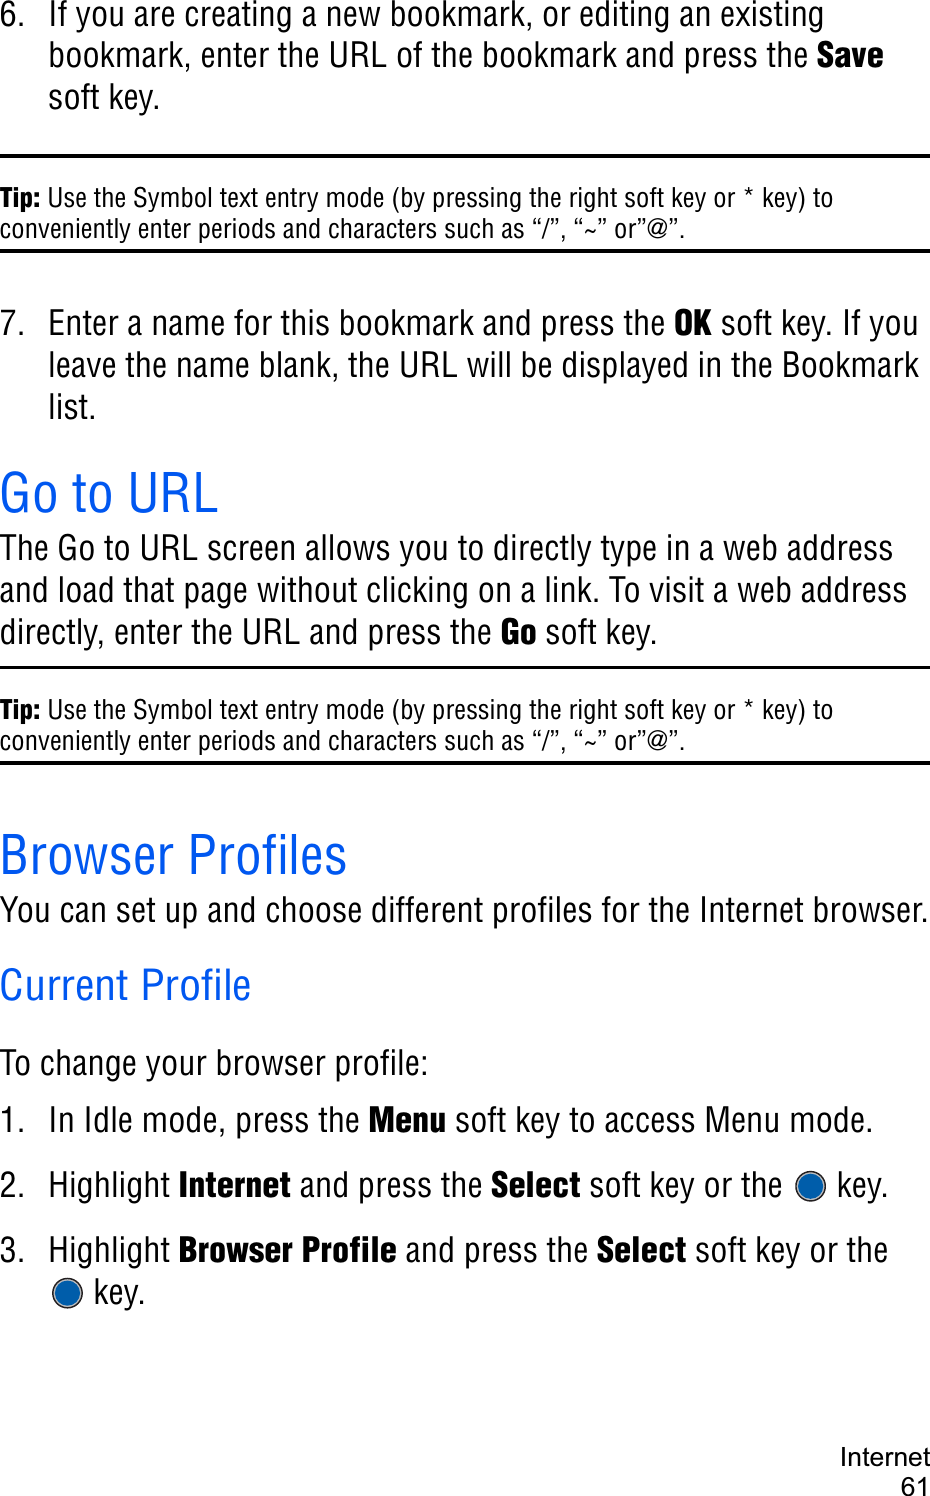 Internet616. If you are creating a new bookmark, or editing an existing bookmark, enter the URL of the bookmark and press the Savesoft key.Tip: Use the Symbol text entry mode (by pressing the right soft key or * key) to conveniently enter periods and characters such as “/”, “~” or”@”.7. Enter a name for this bookmark and press the OK soft key. If you leave the name blank, the URL will be displayed in the Bookmark list.Go to URLThe Go to URL screen allows you to directly type in a web address and load that page without clicking on a link. To visit a web address directly, enter the URL and press the Go soft key.Tip: Use the Symbol text entry mode (by pressing the right soft key or * key) to conveniently enter periods and characters such as “/”, “~” or”@”.Browser ProfilesYou can set up and choose different profiles for the Internet browser.Current ProfileTo change your browser profile:1. In Idle mode, press the Menu soft key to access Menu mode.2. Highlight Internet and press the Select soft key or the  key.3. Highlight Browser Profile and press the Select soft key or the key.